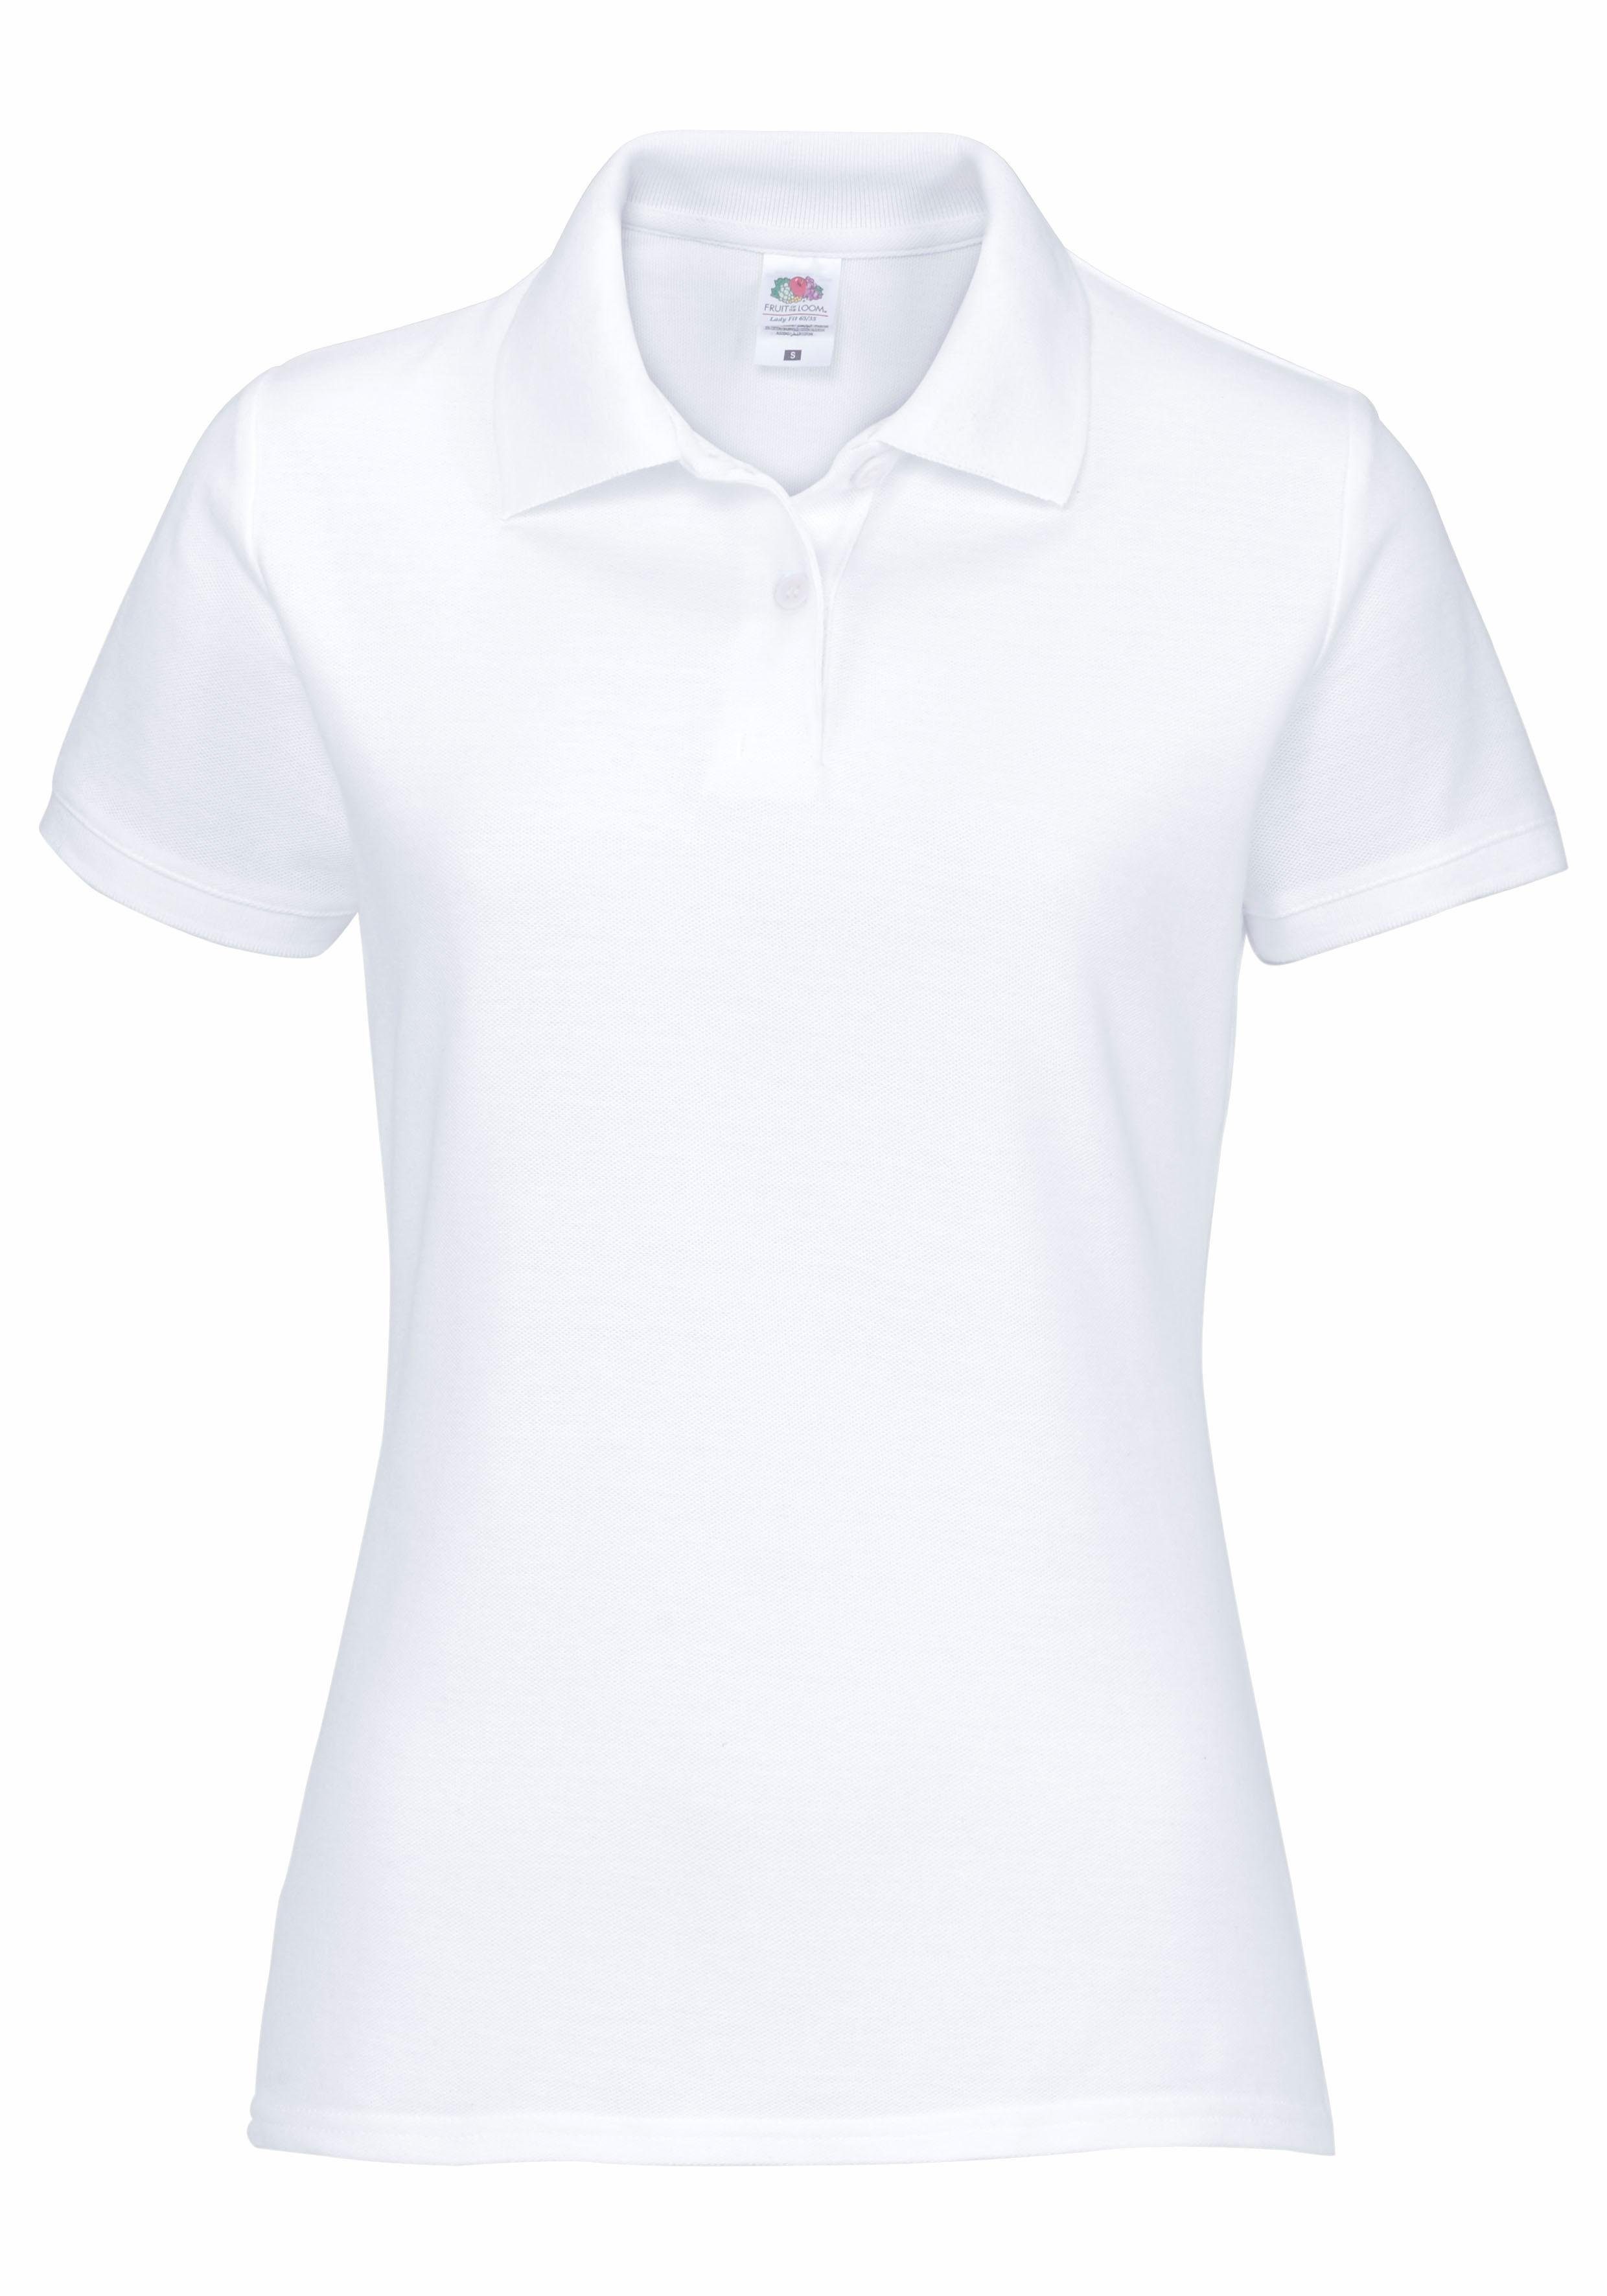 Polo Poloshirt Fruit of Loom weiß Lady-Fit Premium the